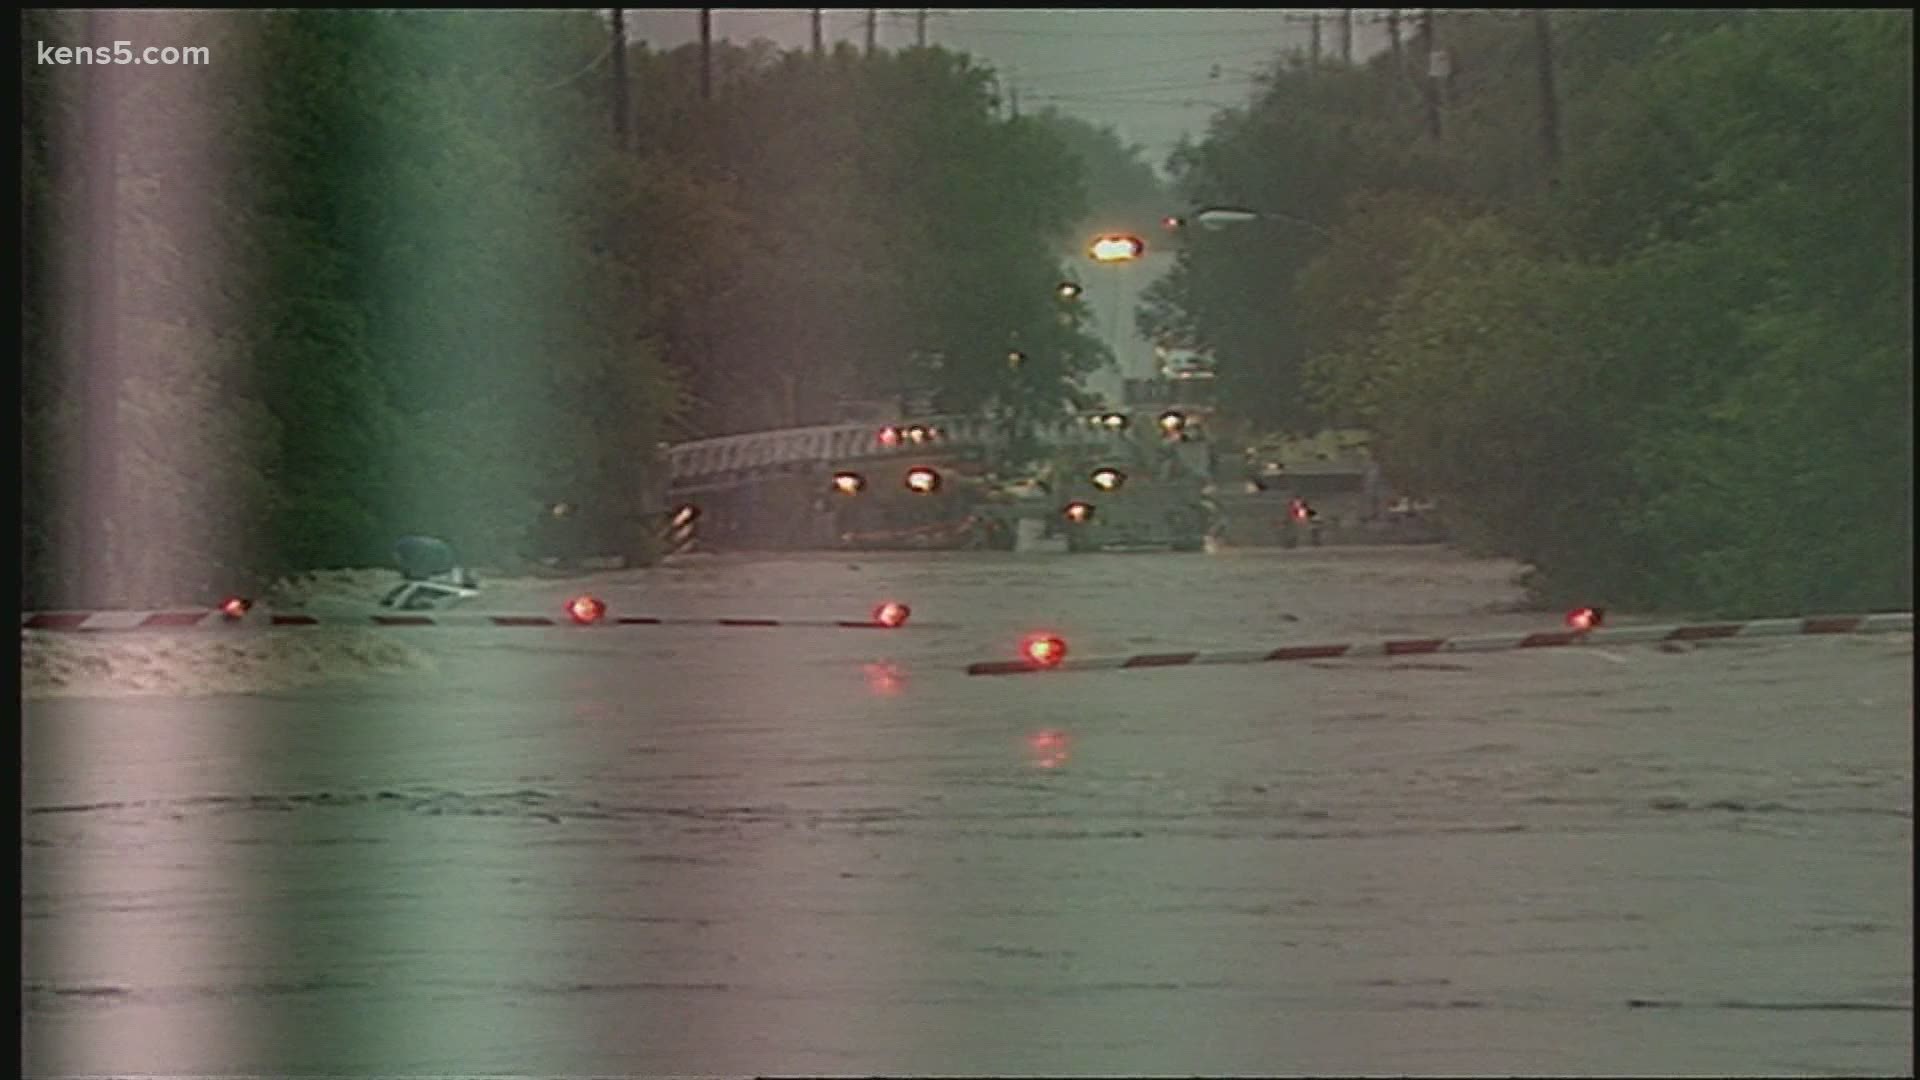 In October of 1998, high flood waters ravaged portions of San Antonio so thoroughly that the government encouraged the city to buy out and destroy damaged homes.